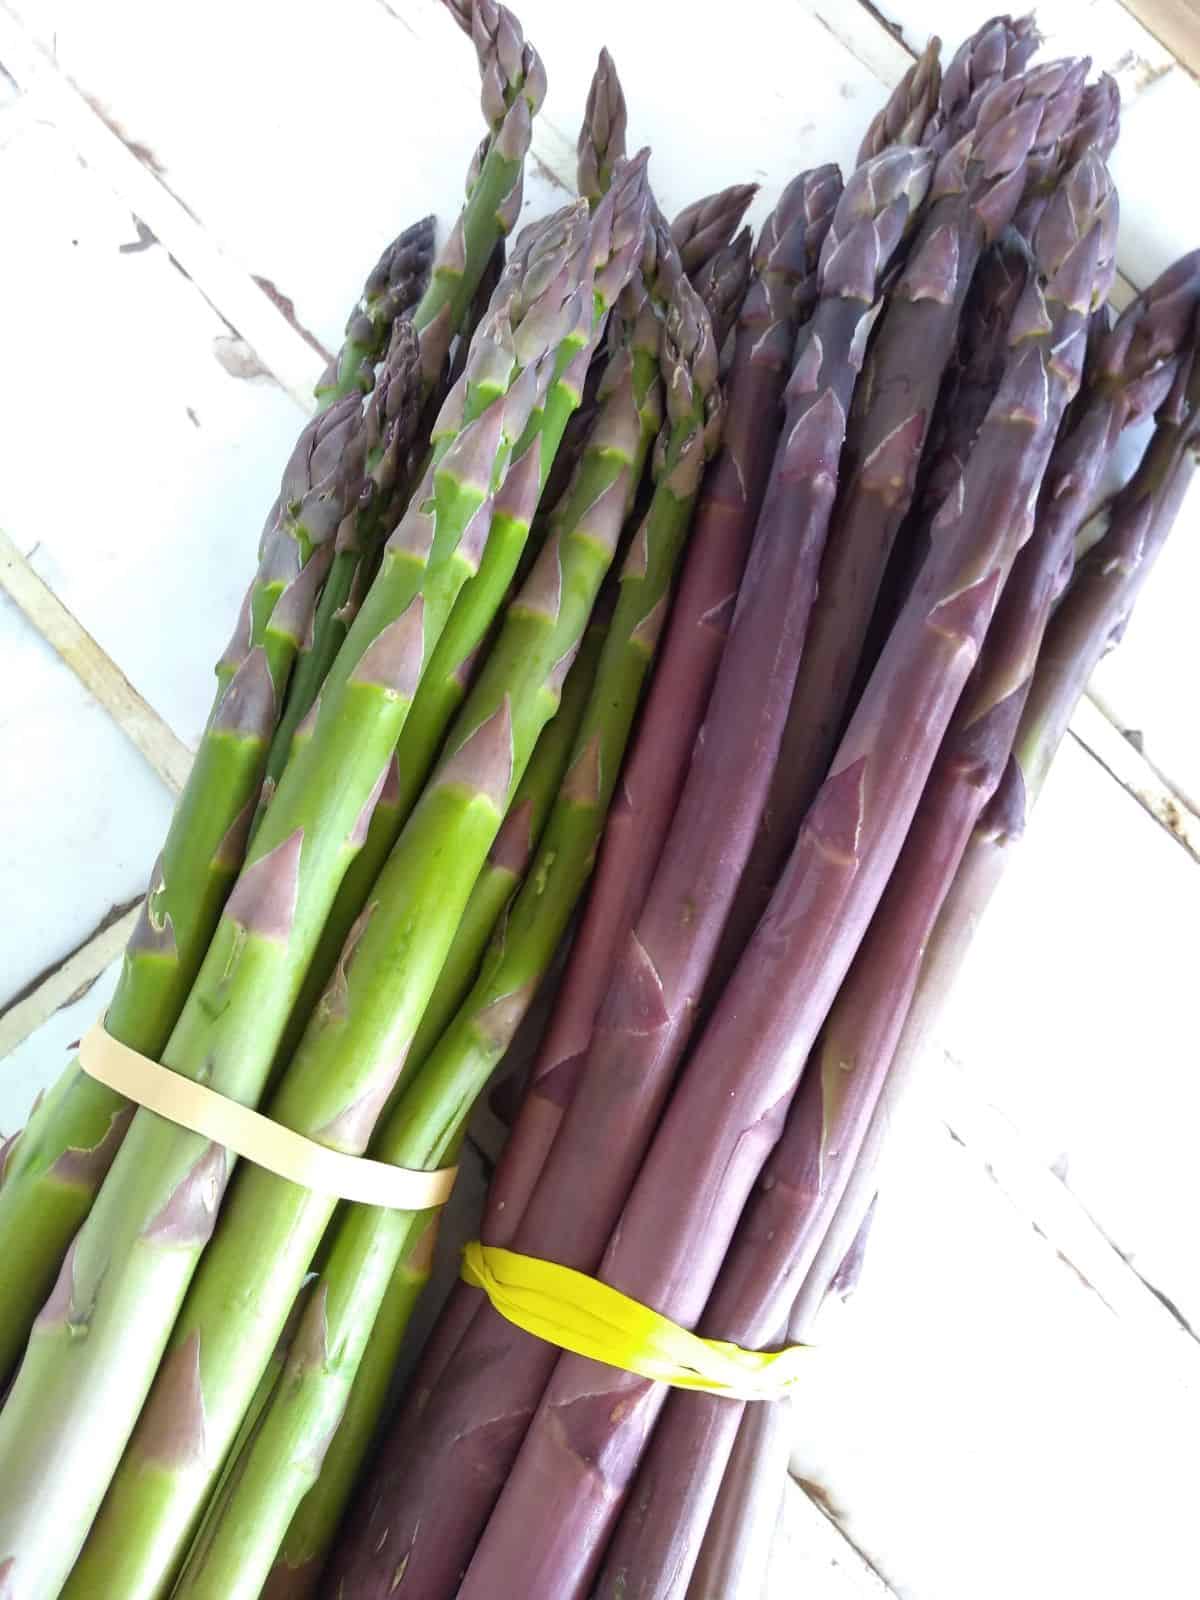 A bunch of green asparagus next to a bunch of purple asparagus on a white tile counter top.